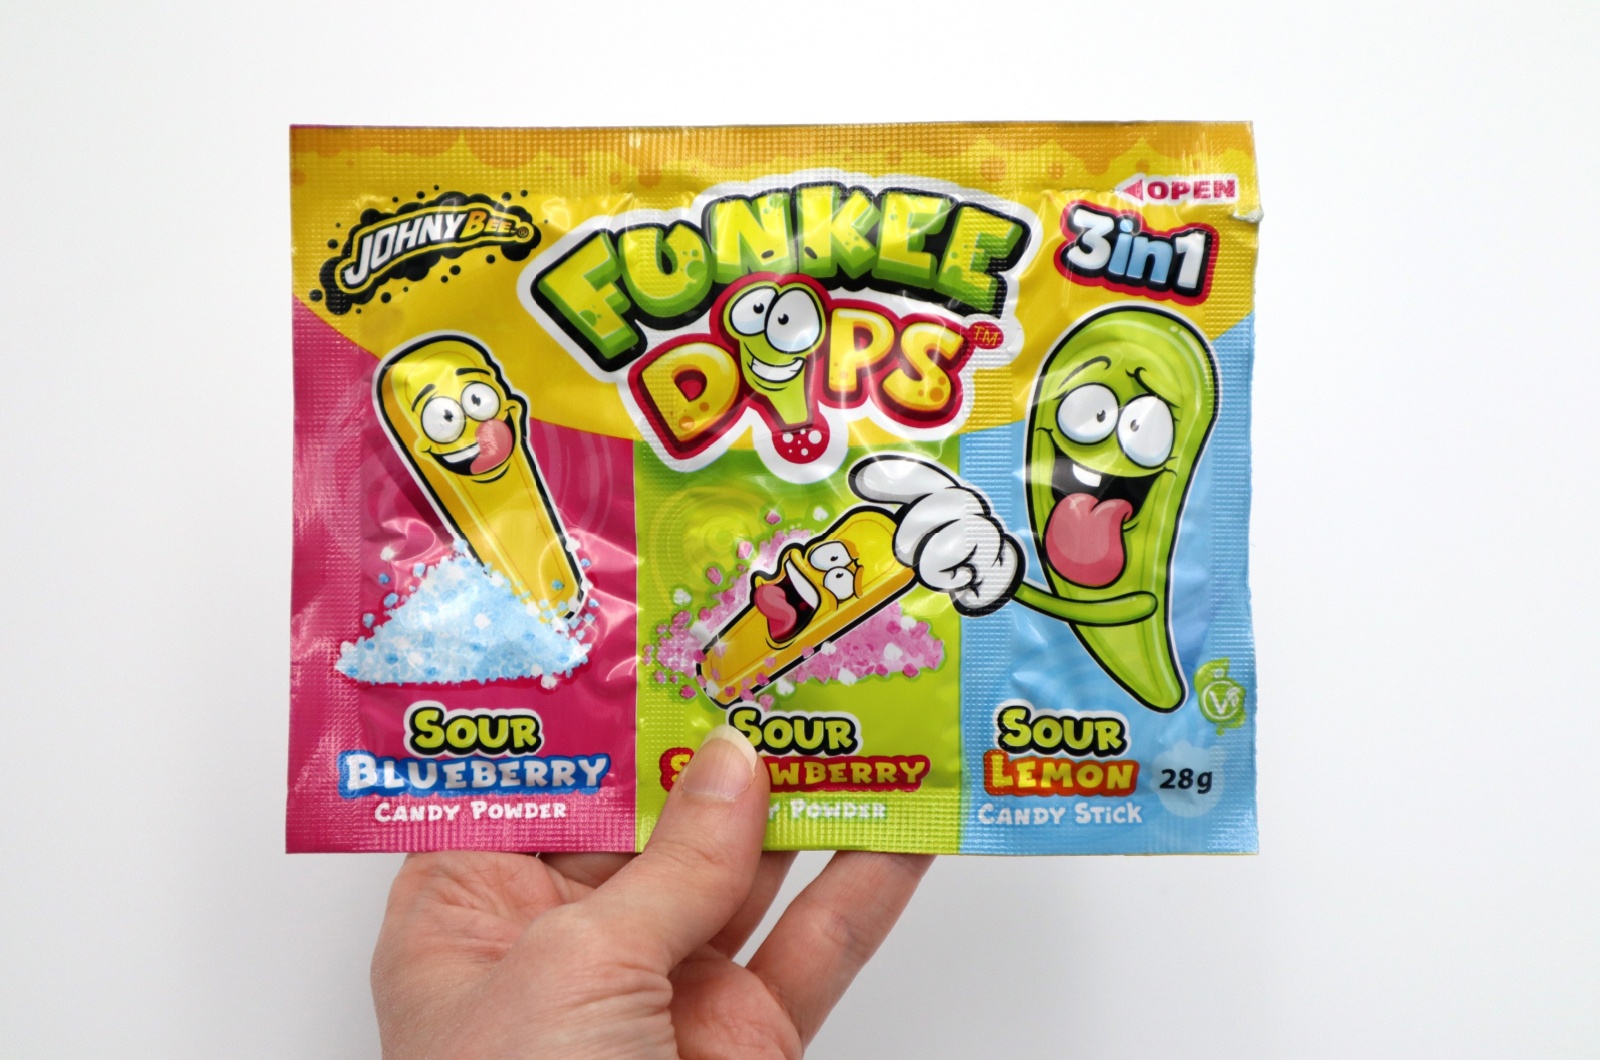 sour, fruit flavored candy